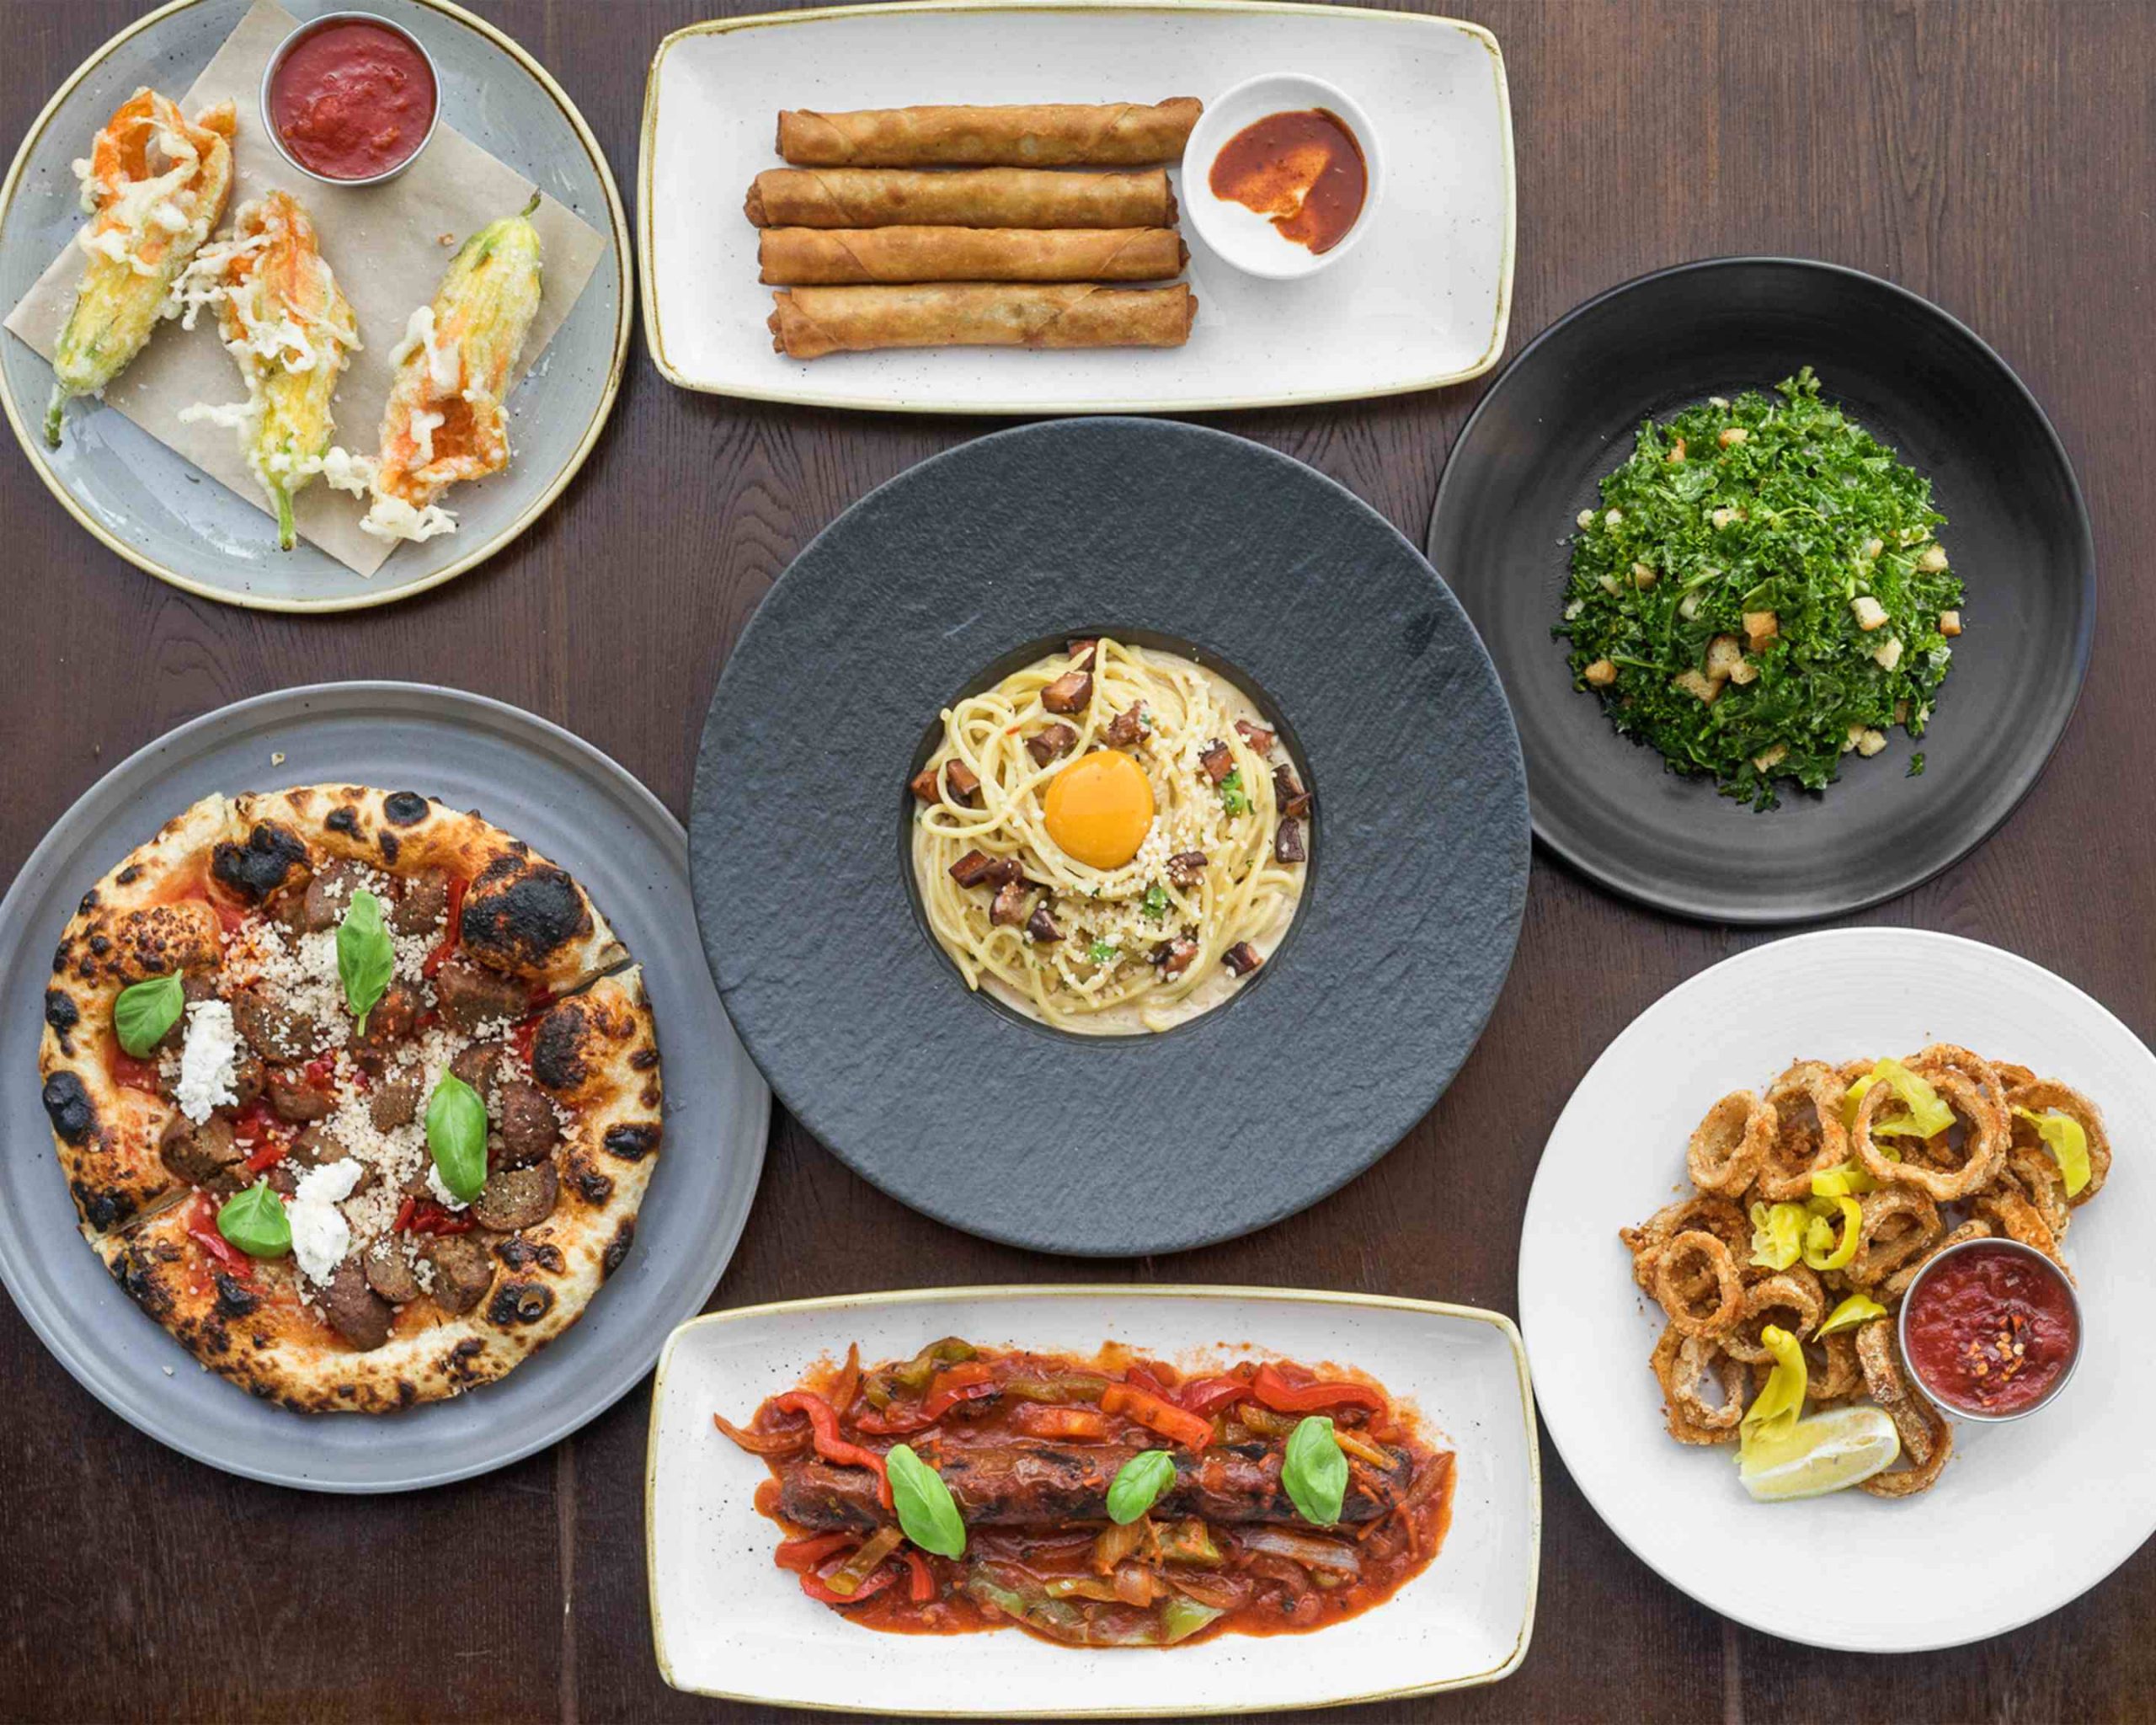 Image of various dishes at Crossroads Kitchen restaurant